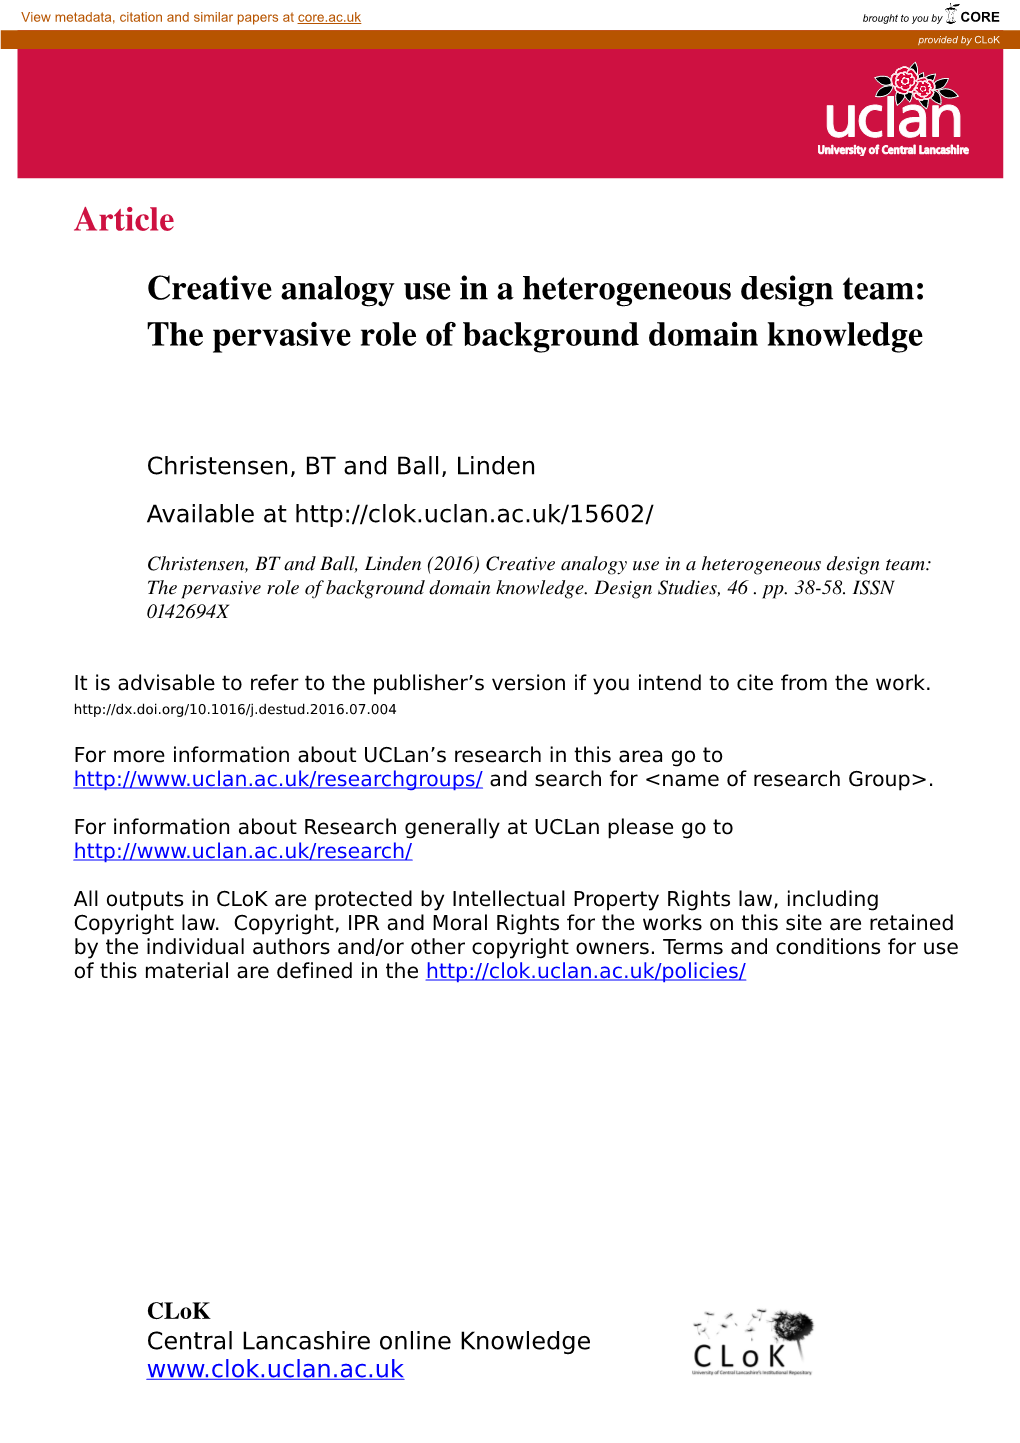 Article Creative Analogy Use in a Heterogeneous Design Team: The